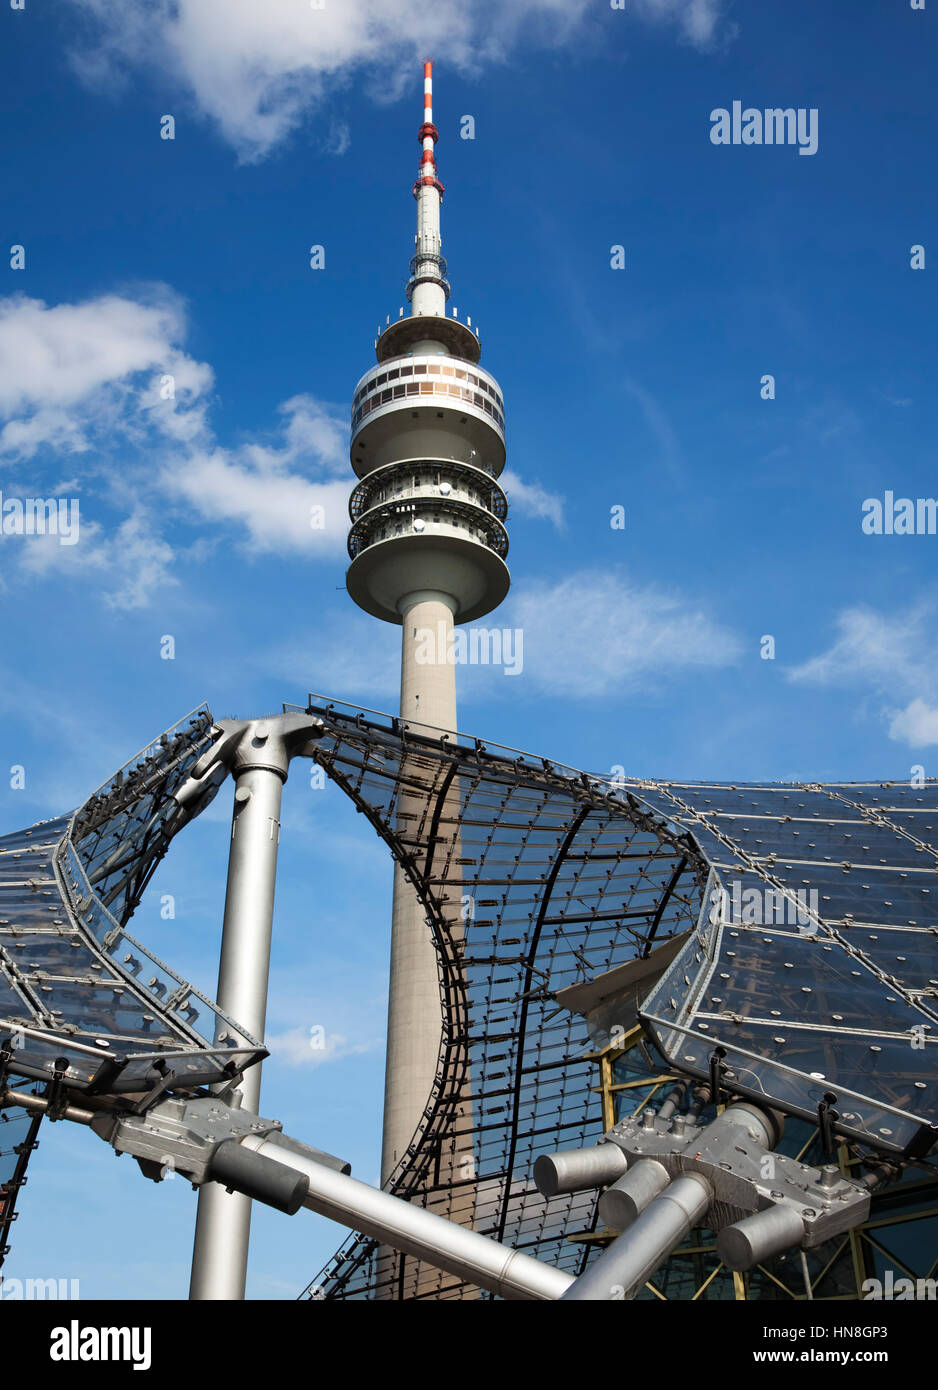 Munich, Germany - September 5, 2010: Olympiaturm tower and roof of olympic stadium. The tower has a height of 291 m and a weight of 52,500 tons. Stock Photo